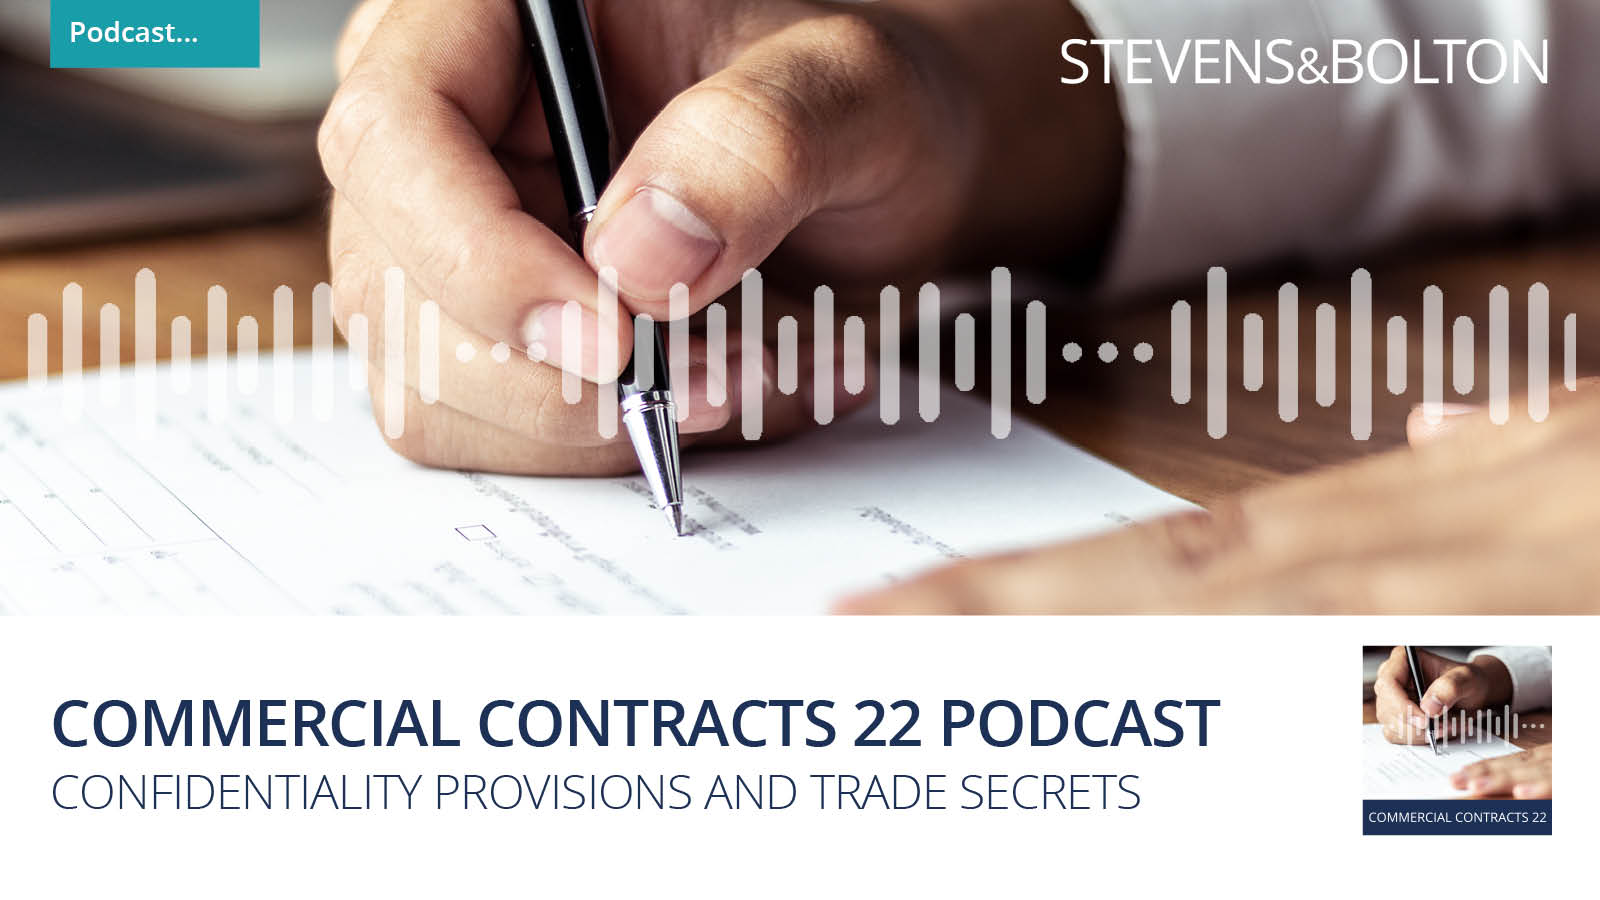 Commercial Contracts 22 - Confidentiality provisions and trade secrets